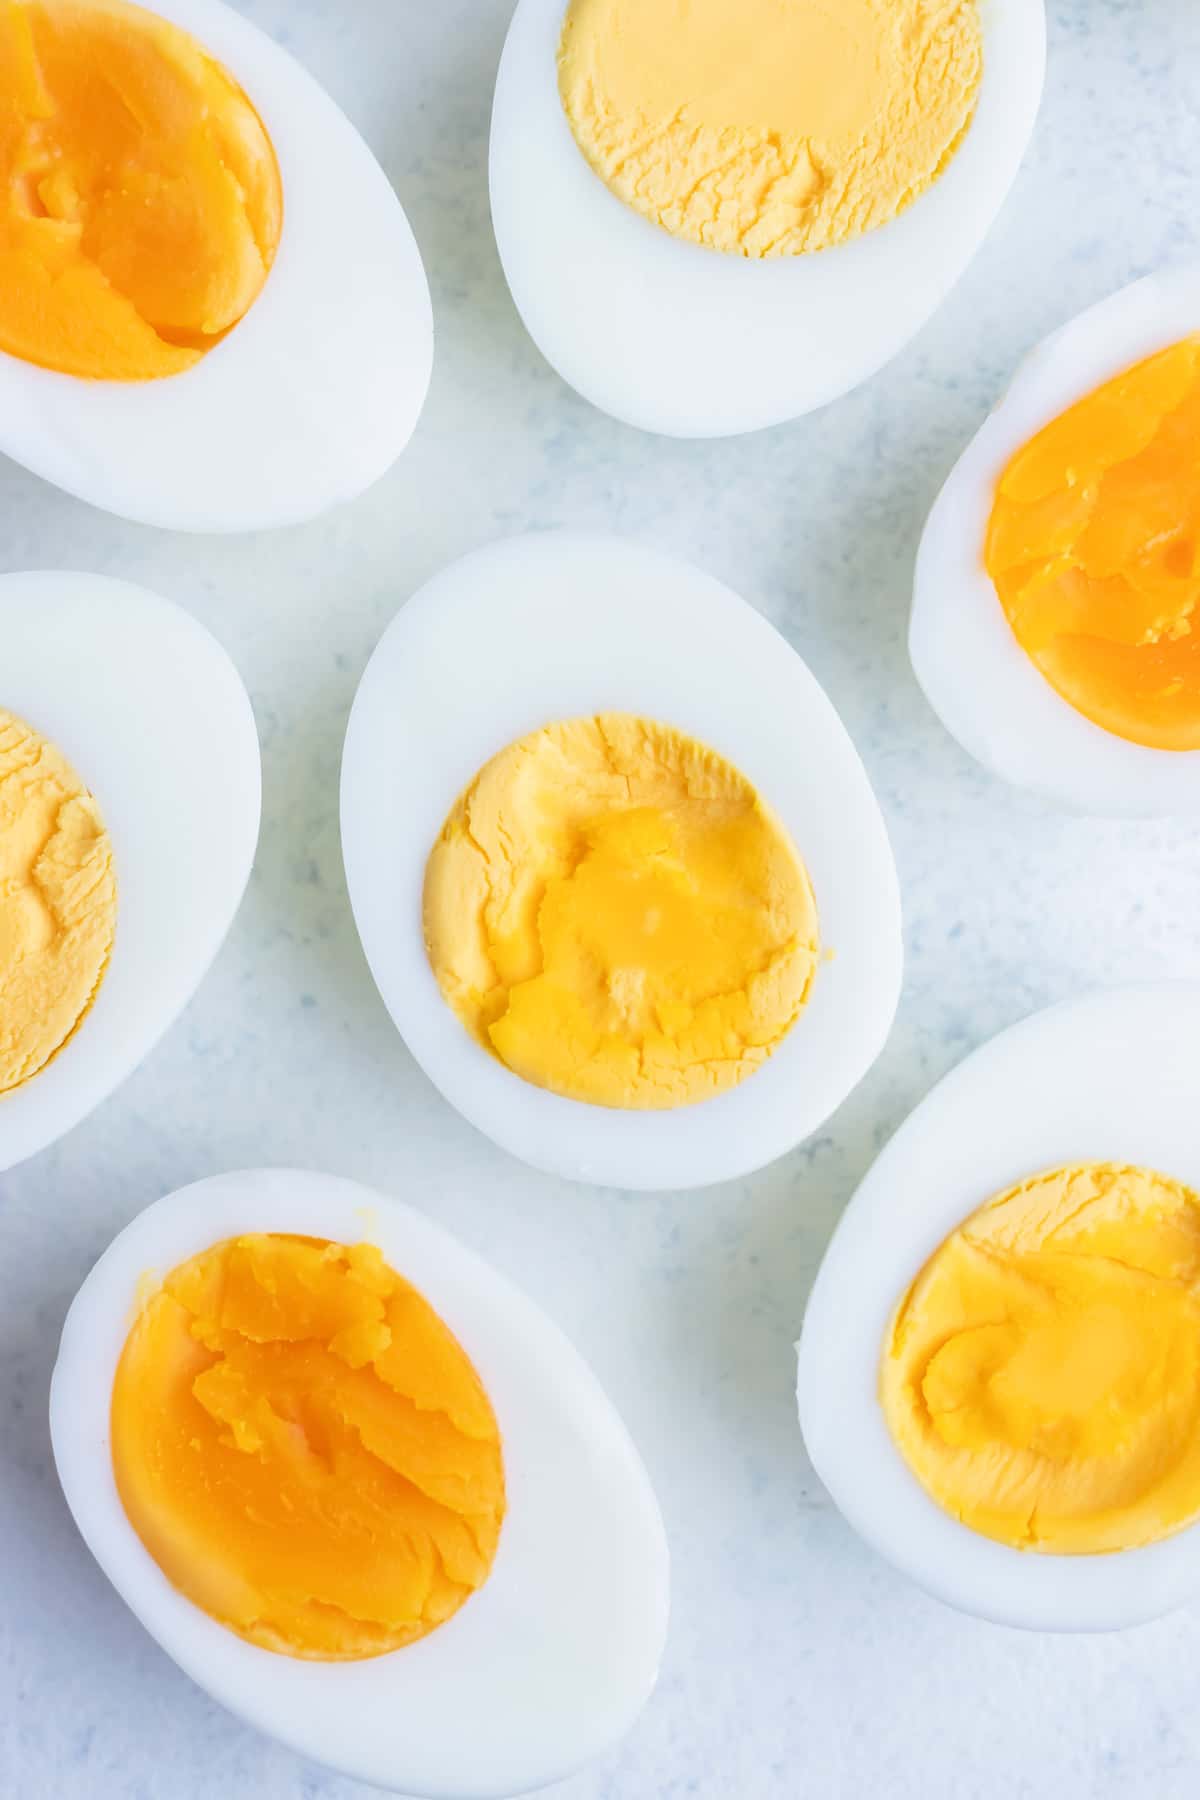 Soft-boiled and hard-boiled eggs are peeled and cut in half.